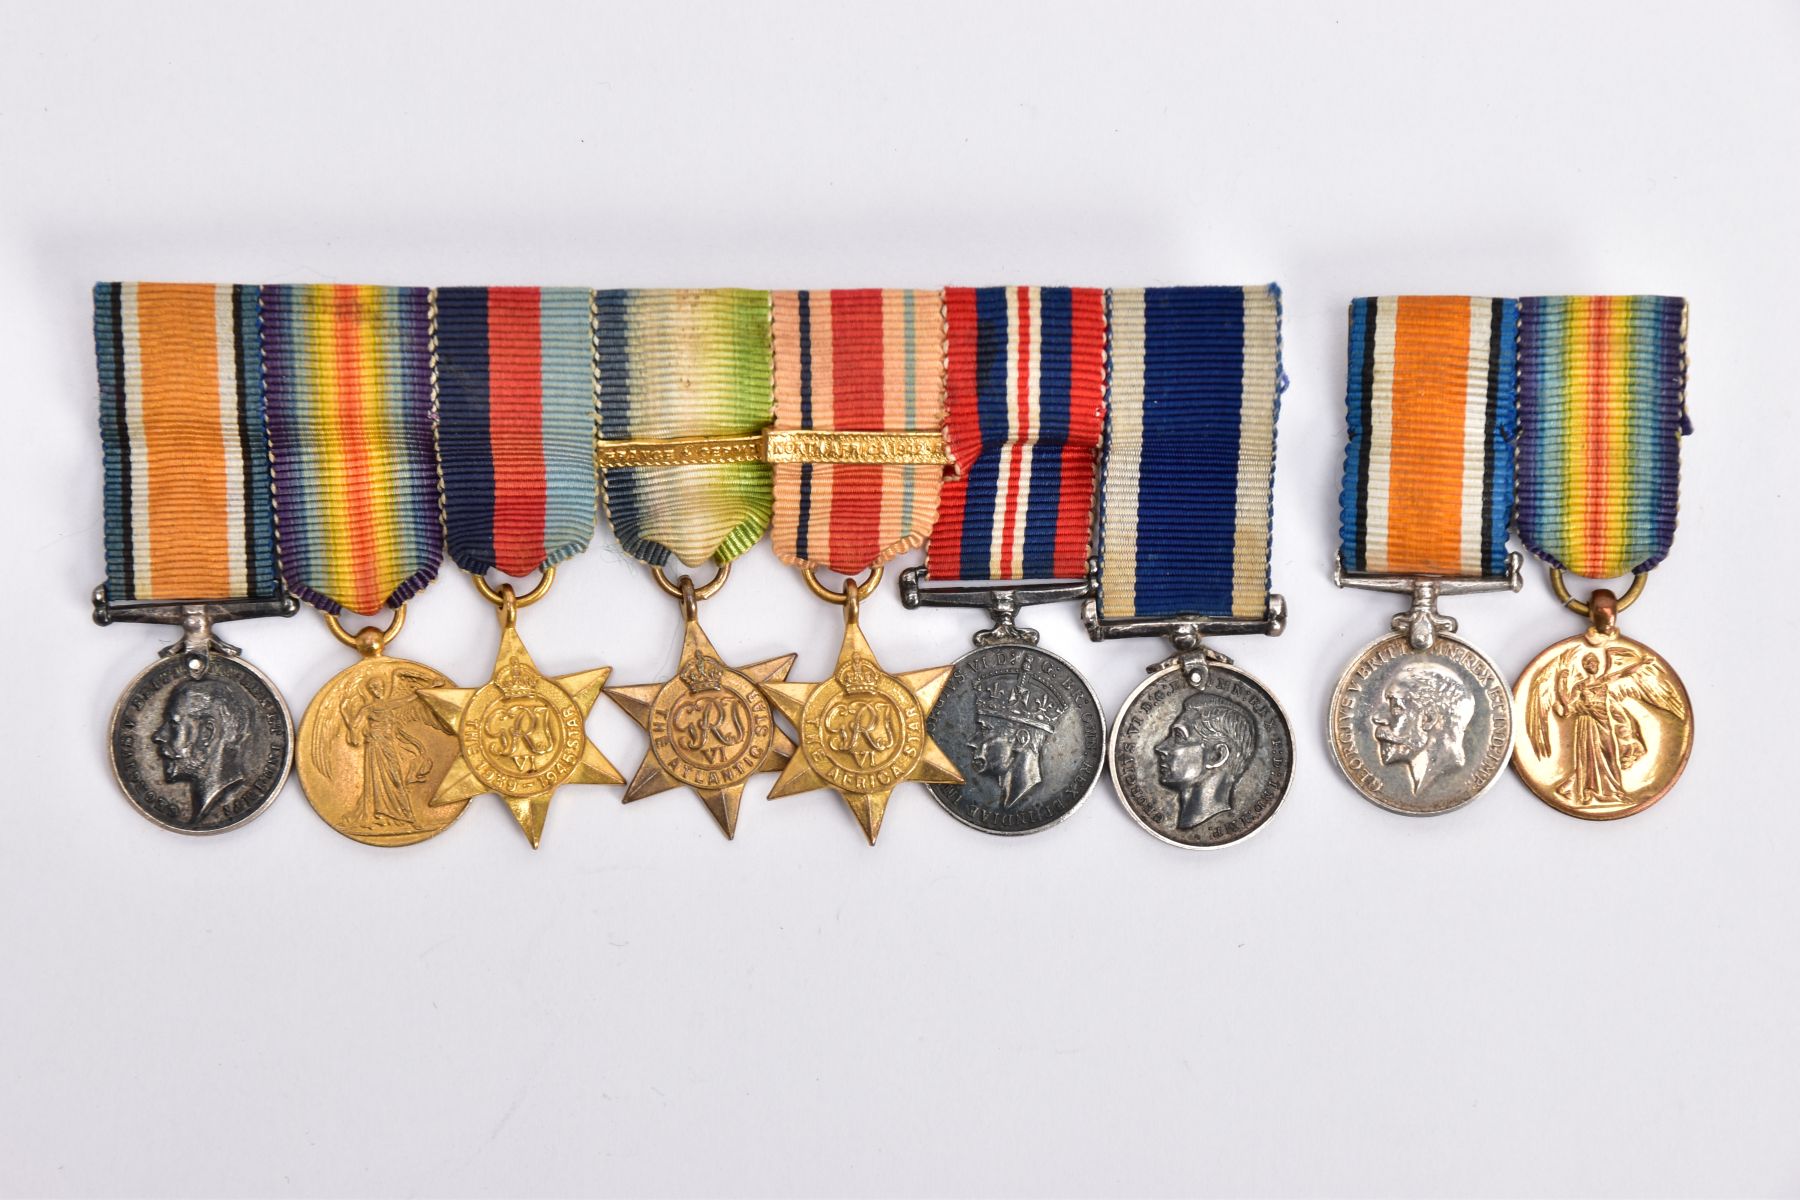 TWO MINIATURE GROUPS OF MEDALS, British War & Victory pair, British War & Victory, 1939-45, Atlantic